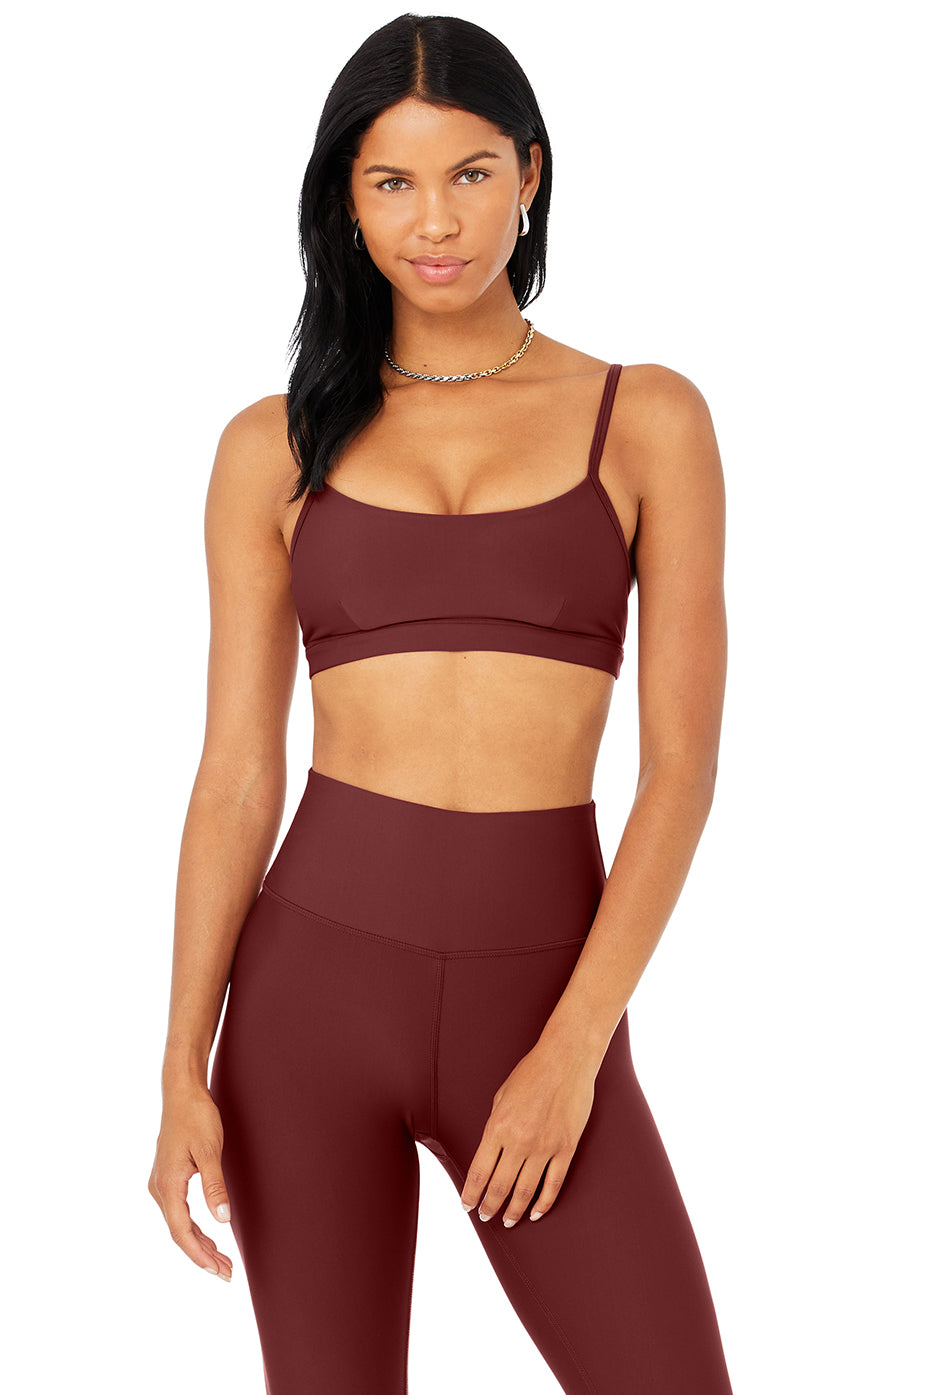 Airlift Intrigue Bra in Cranberry by Alo Yoga